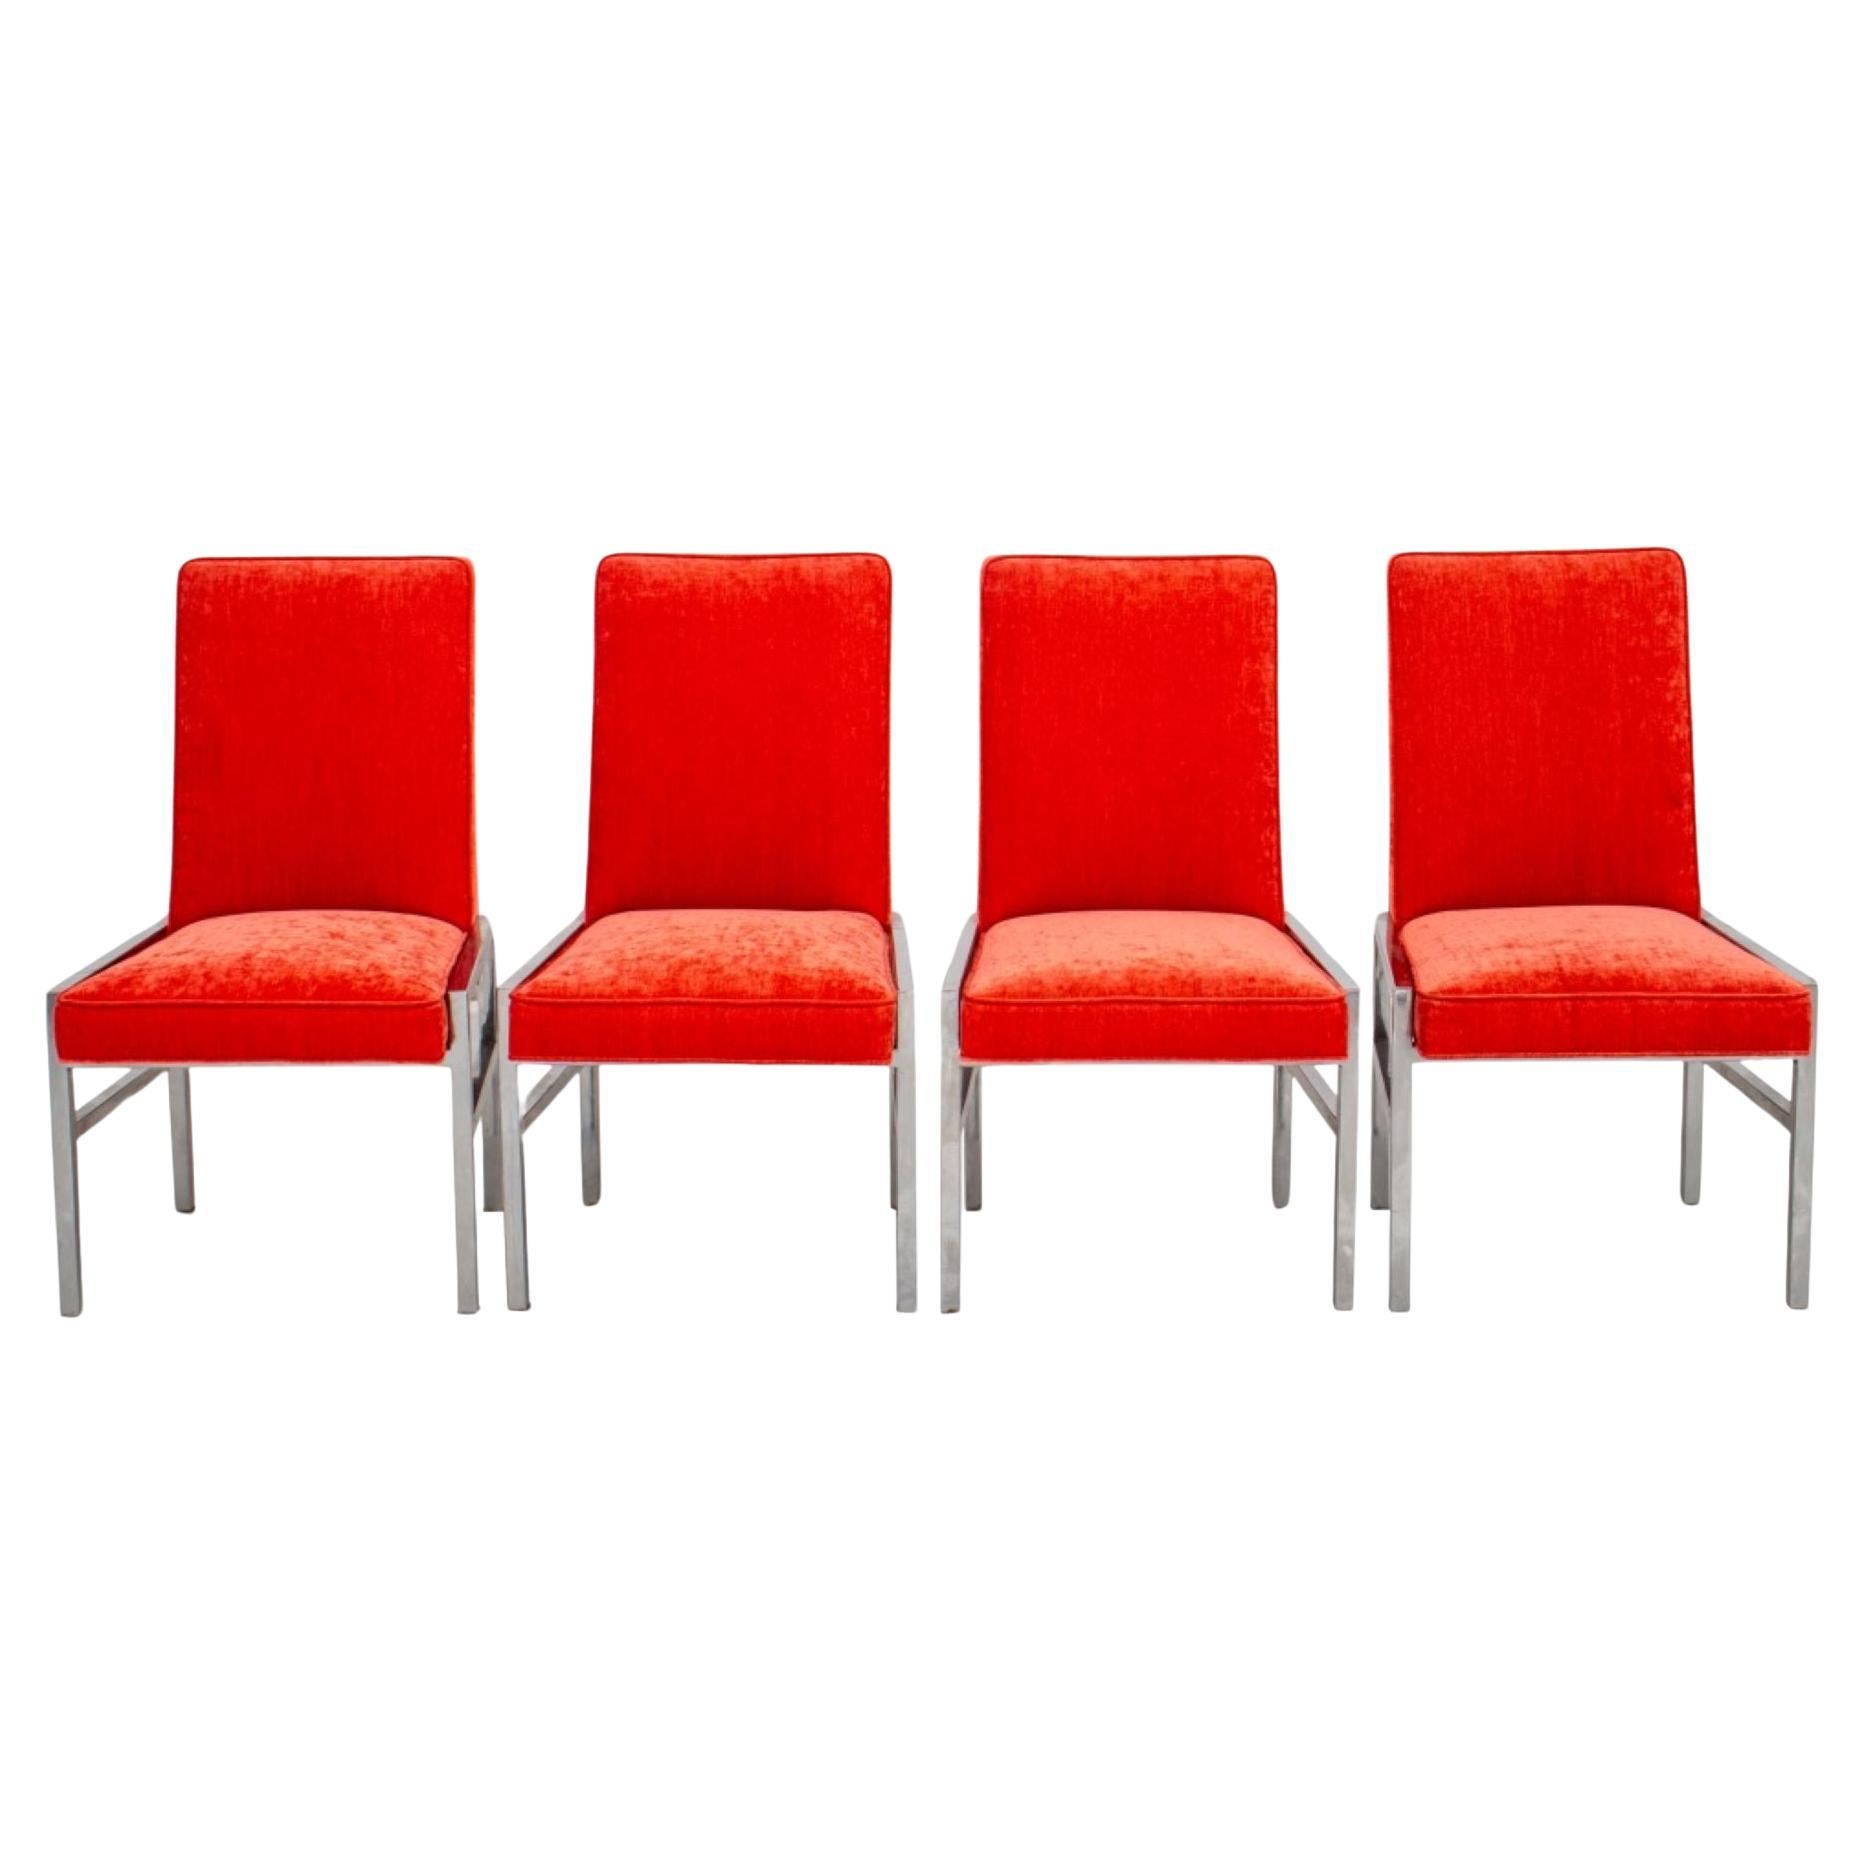 Mid-Century Modern Upholstered Chrome Chairs, 4